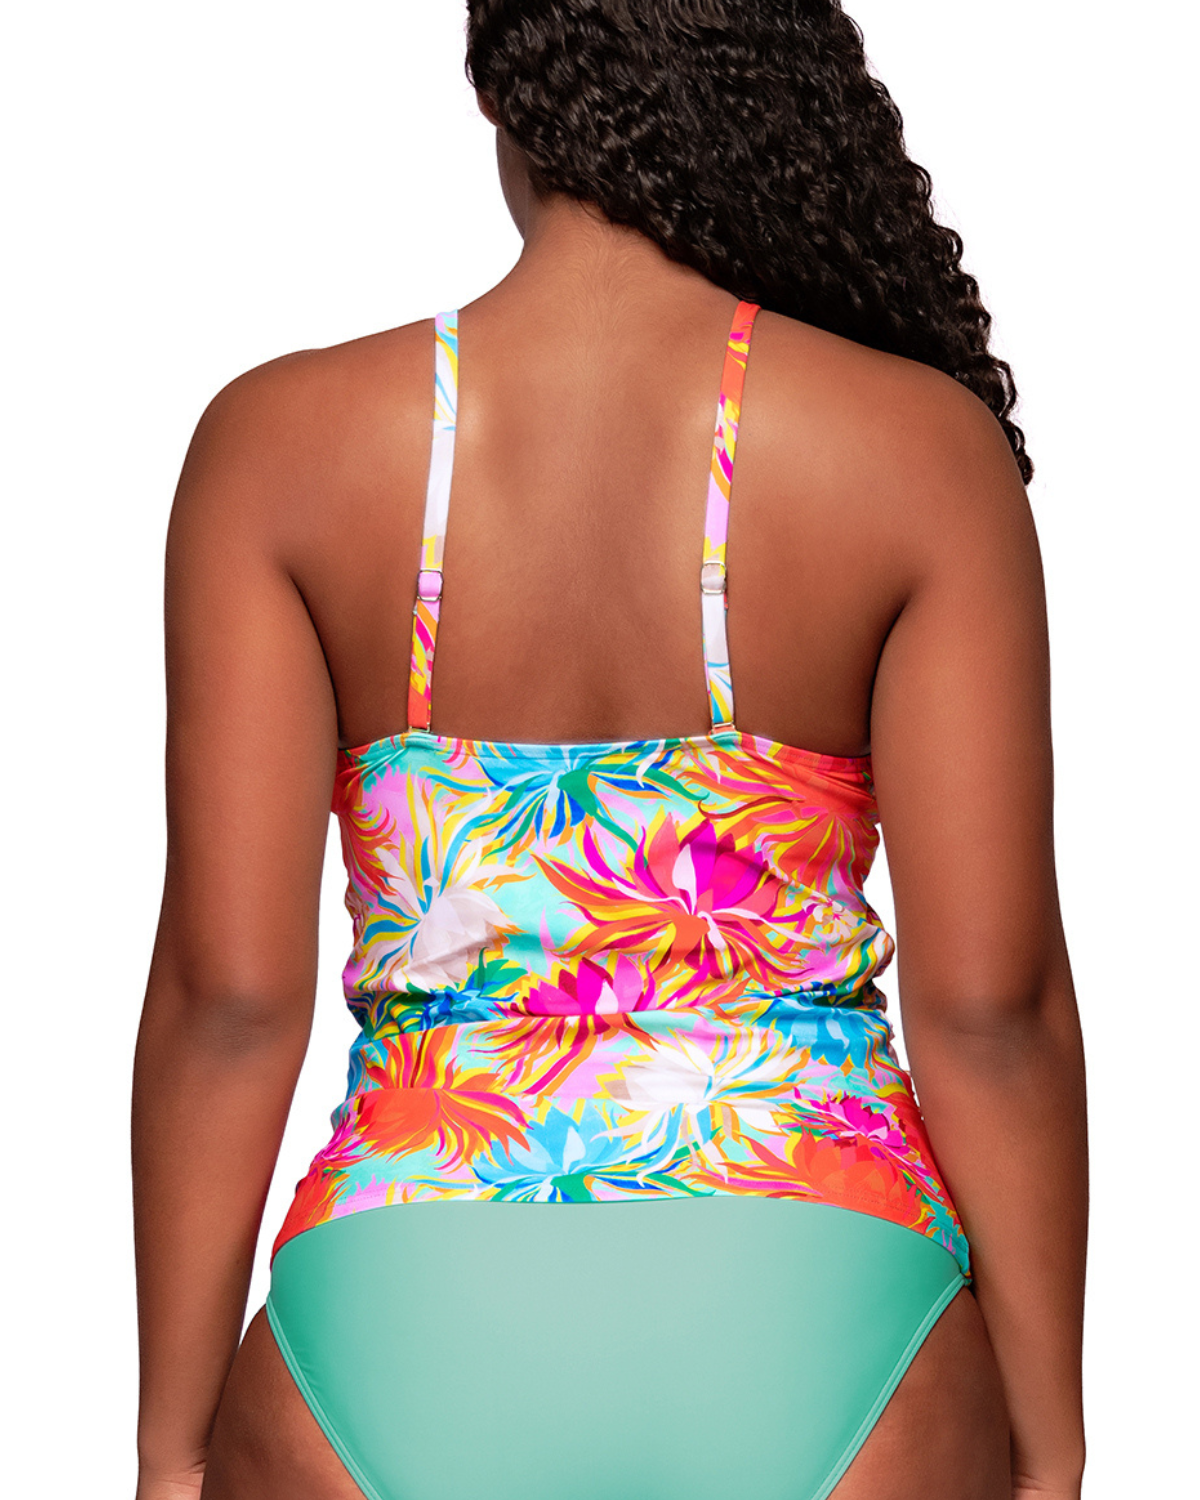 Model wearing a high neck tankini top in an orange, turquoise, white and pink floral print.